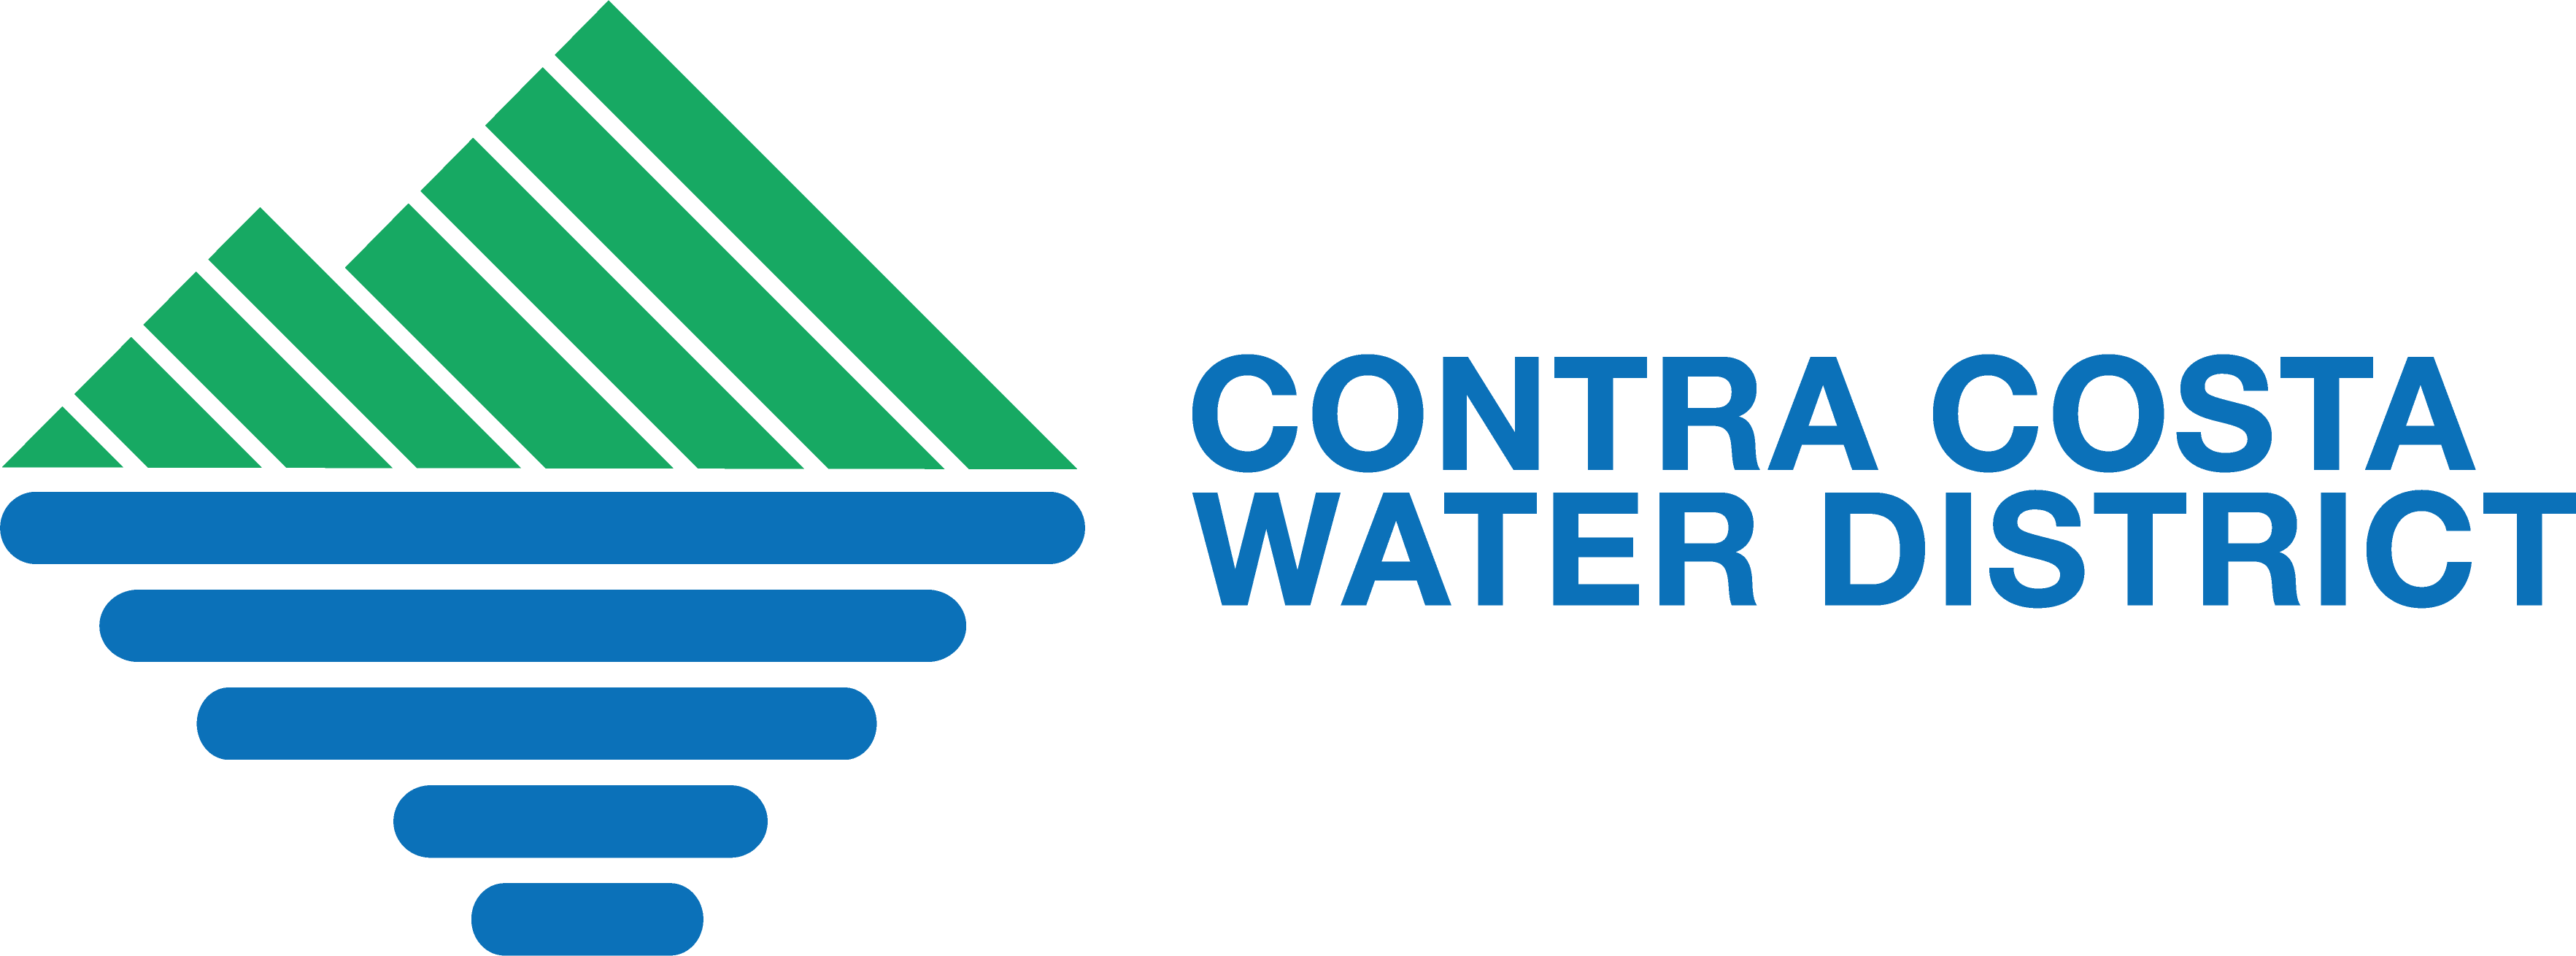 Contra Costa Water District Logo